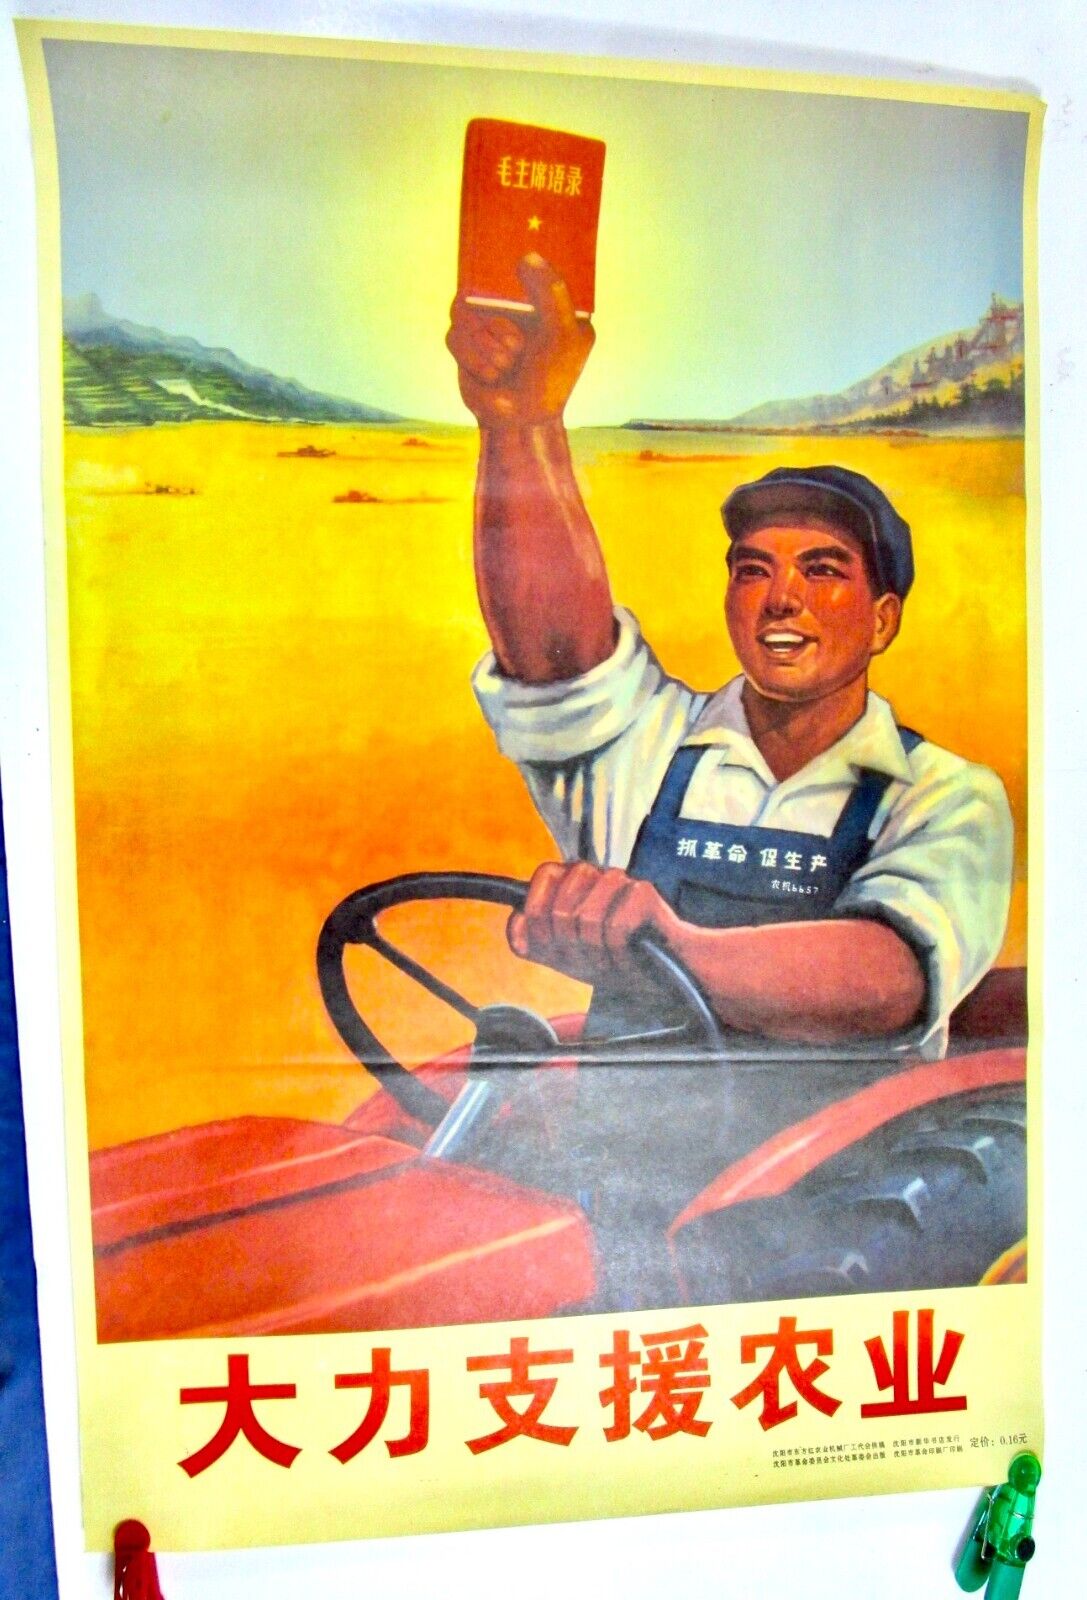 Large Communist China Poster of Worker Holding Copy of Mao’s Sayings, Number 3